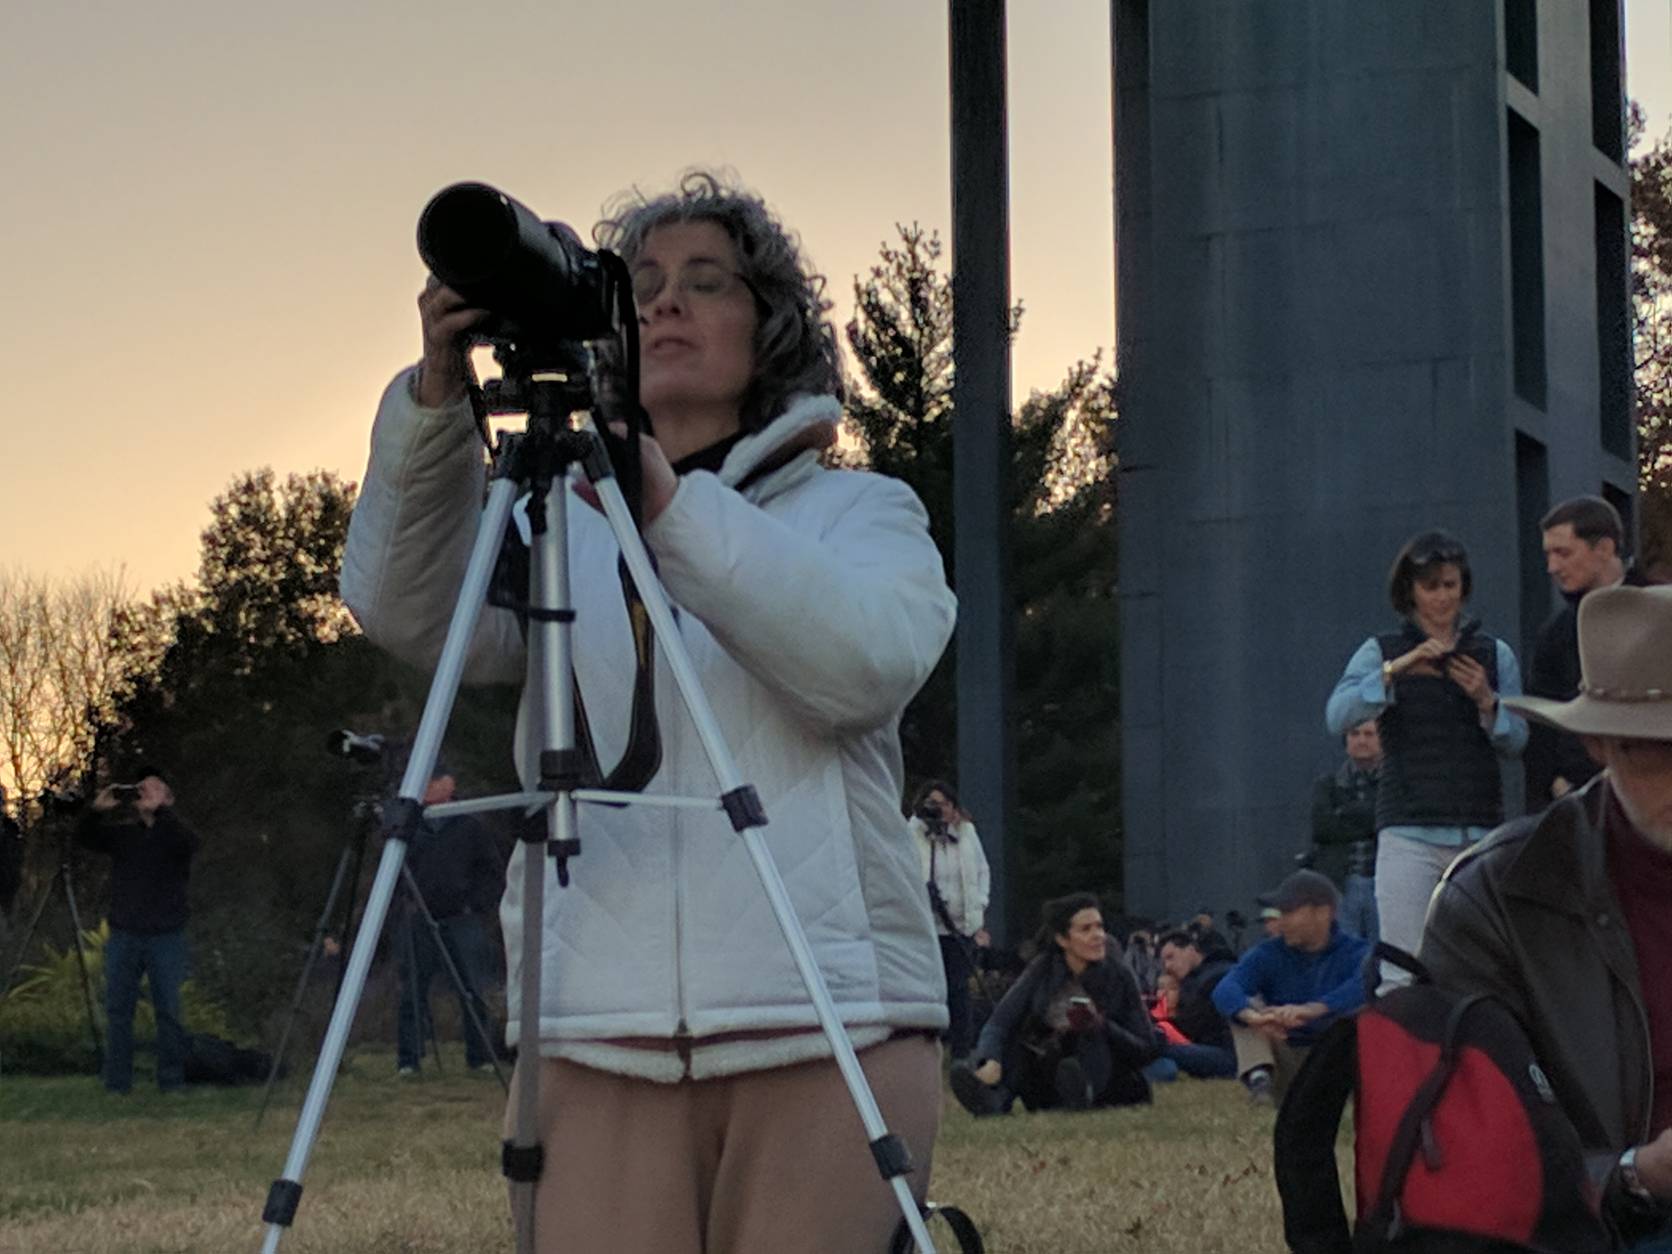 A photographer sets up her camera ahead of the supermoon’s arrival in the evening sky Sunday, Nov. 13, 2016. (WTOP/Hillary Howard)